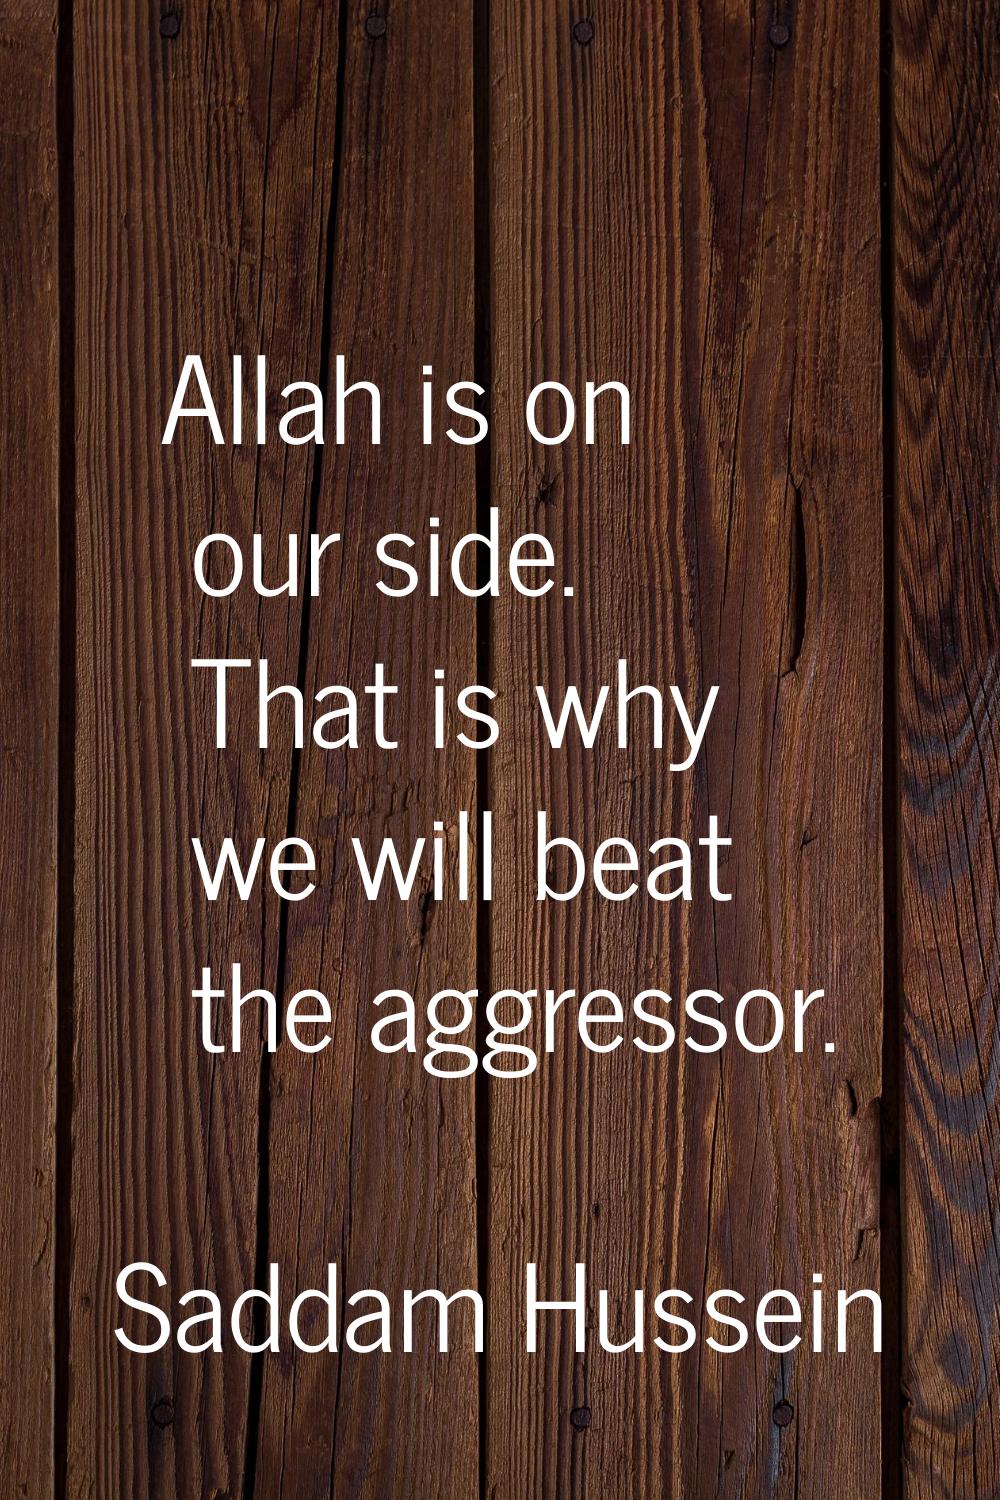 Allah is on our side. That is why we will beat the aggressor.